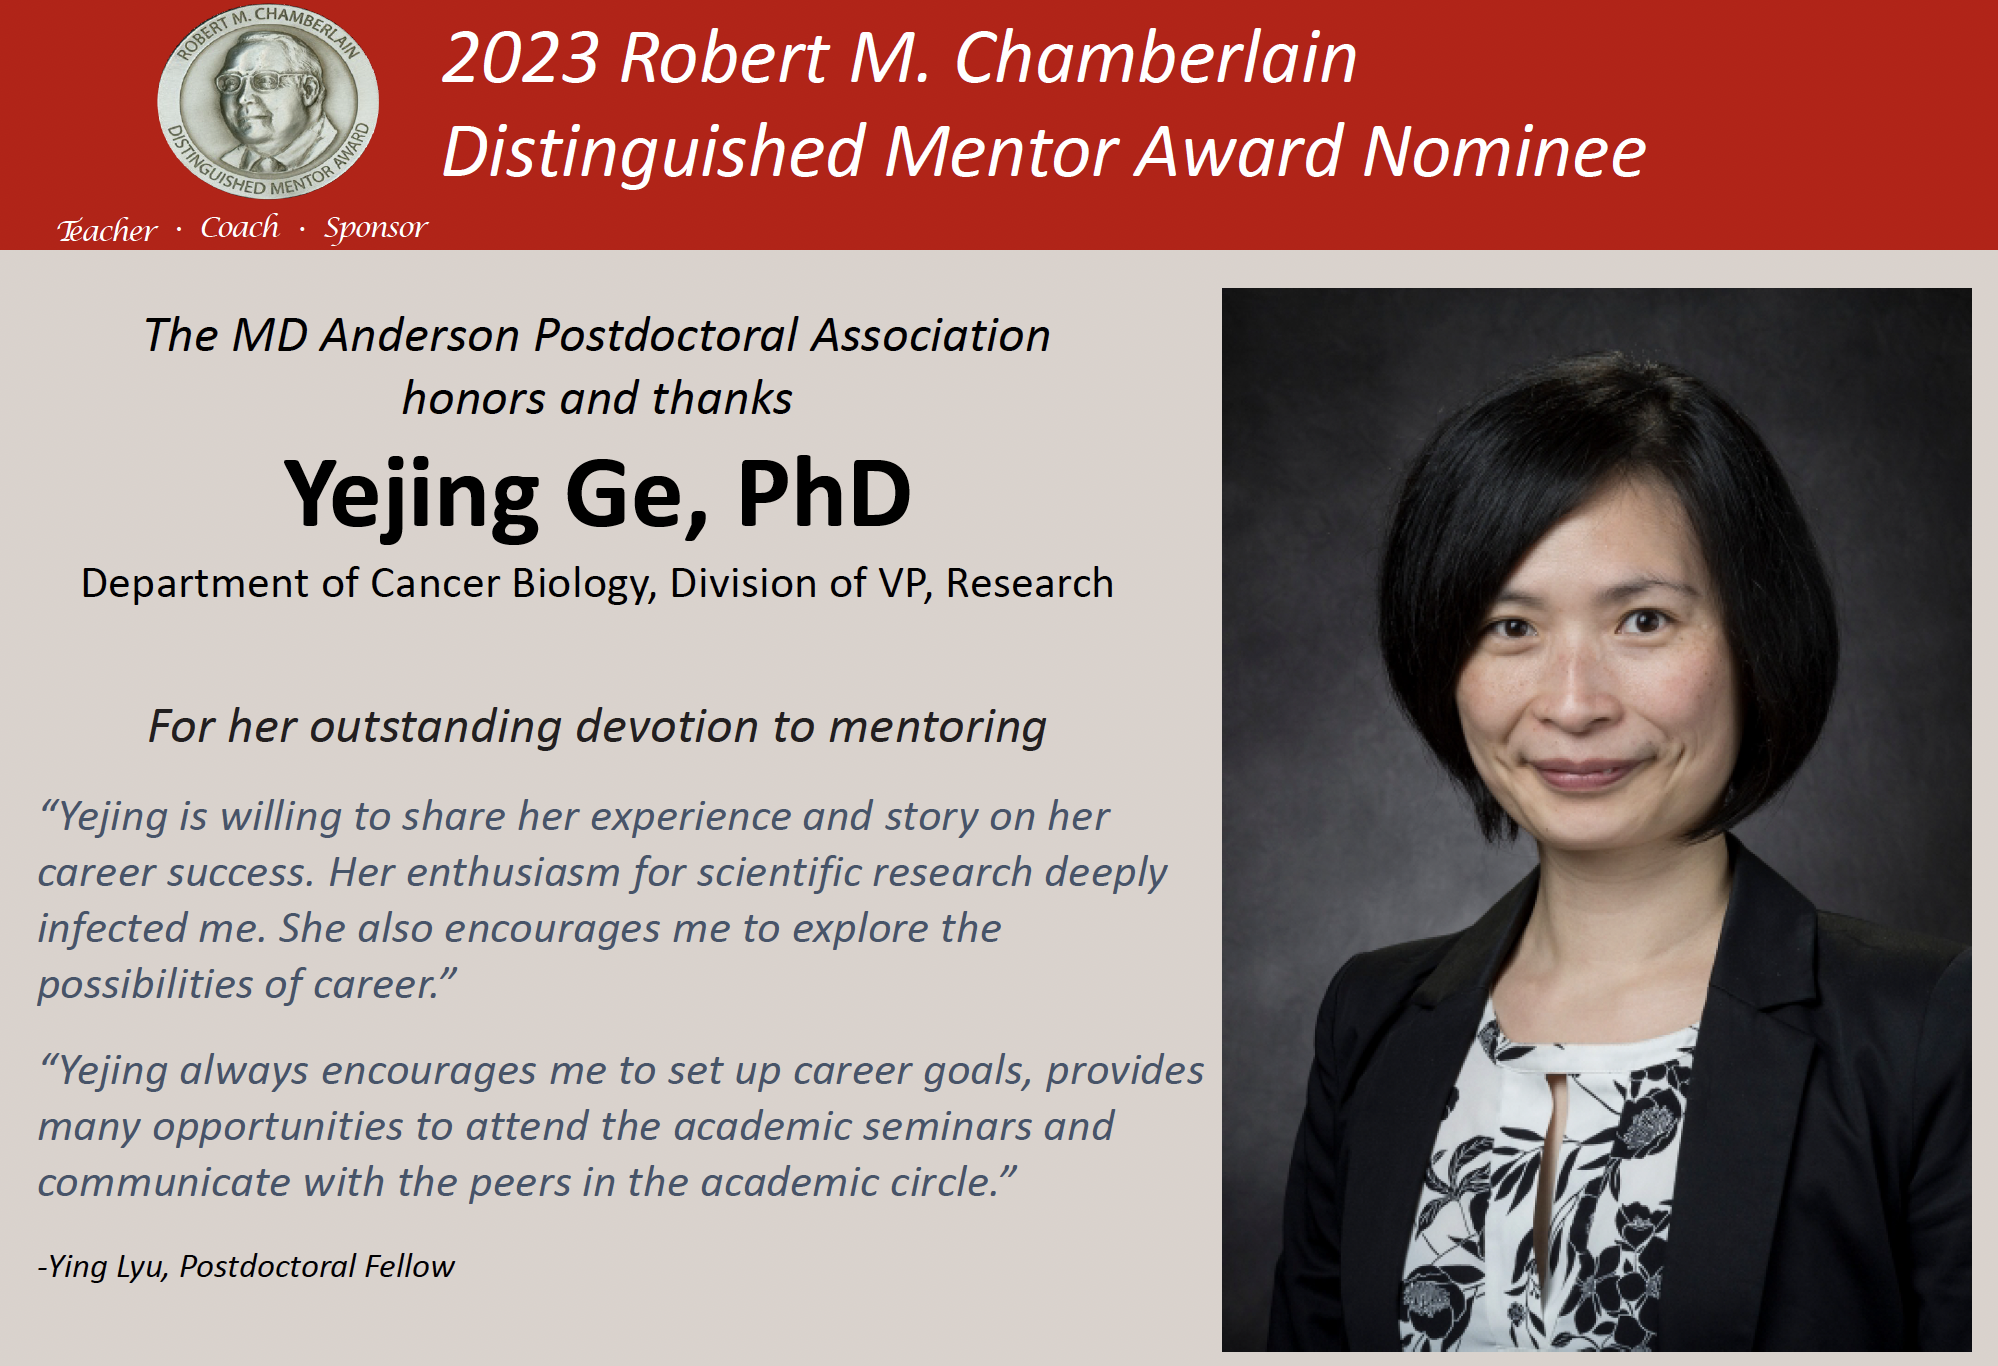 Yejing to be nominated for 2023 Robert M. Chamberlain Distinguished Mentor Award